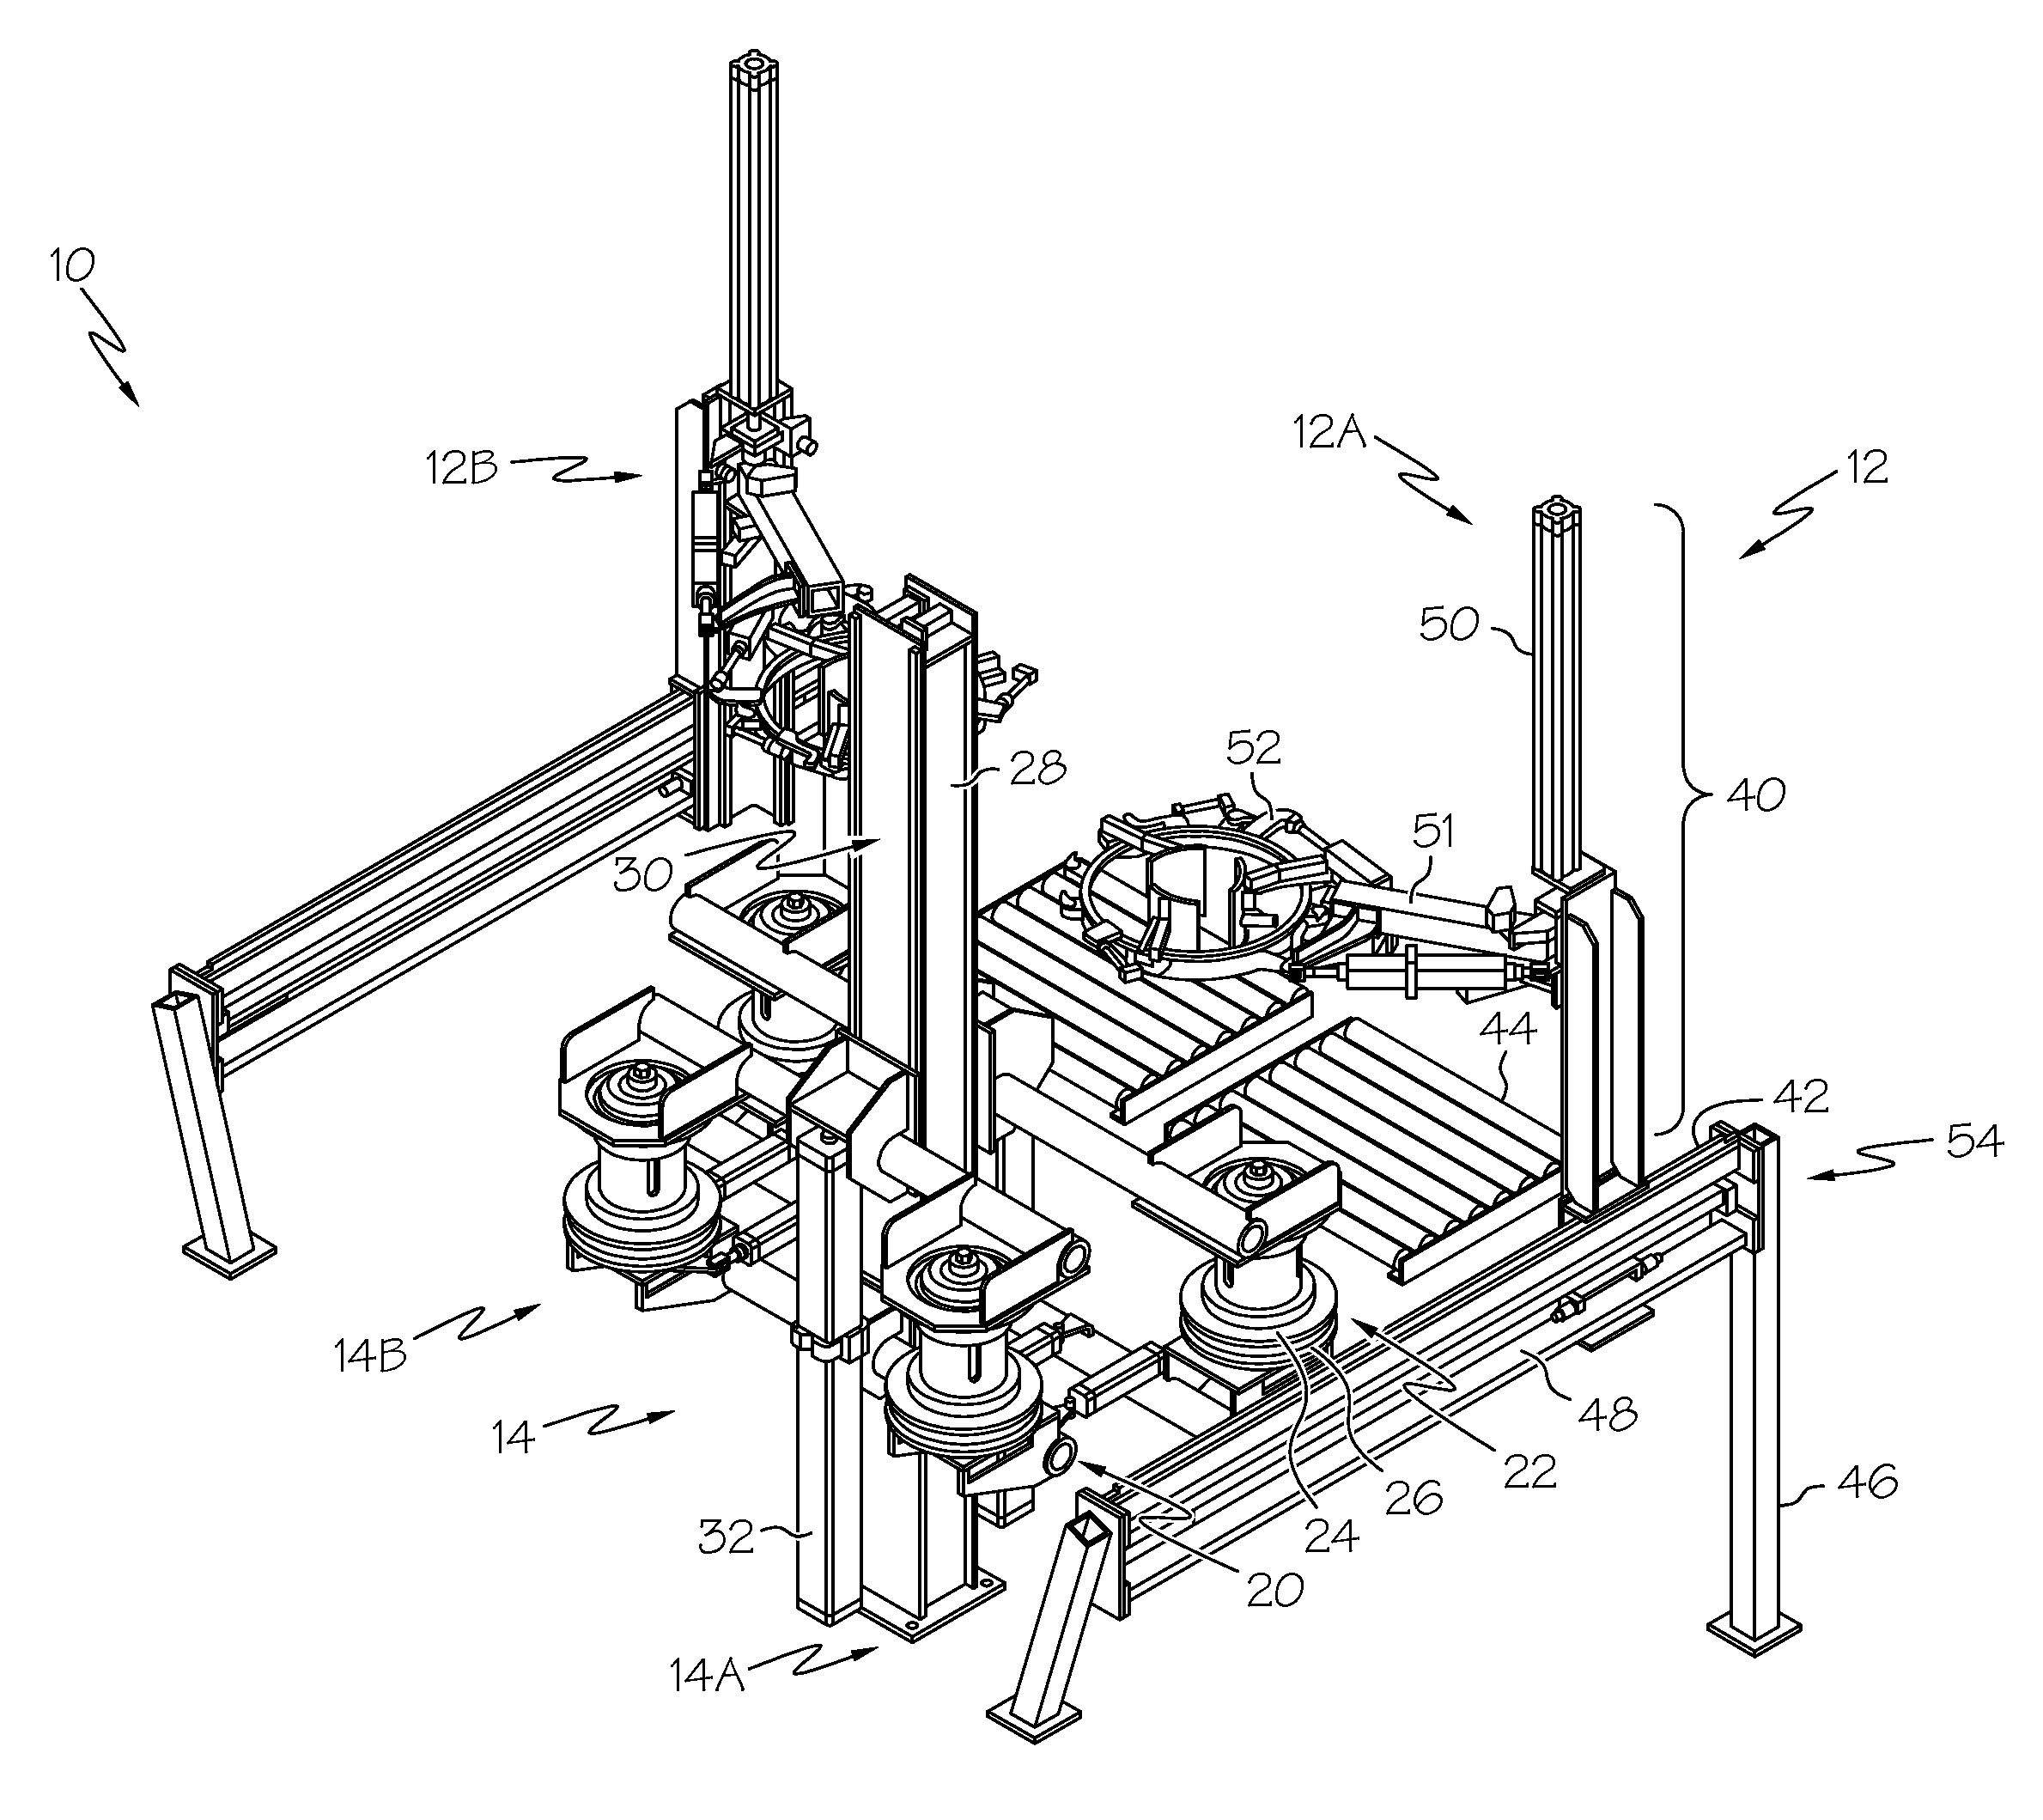 Combination loader and post cure inflator